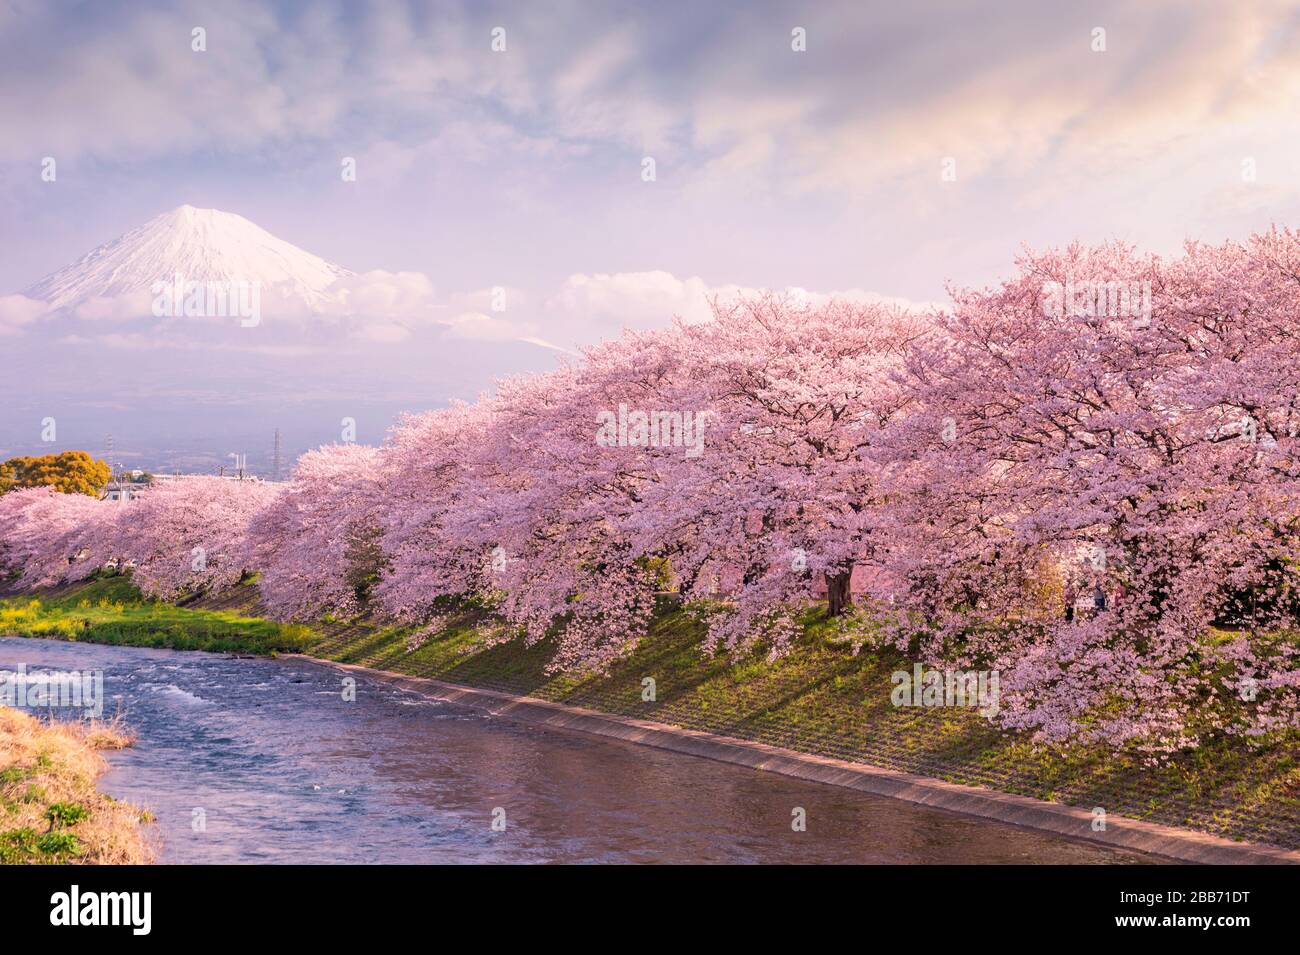 Cherry blossom trees along a river with Mt Fuji in the distance, Honshu, Japan Stock Photo